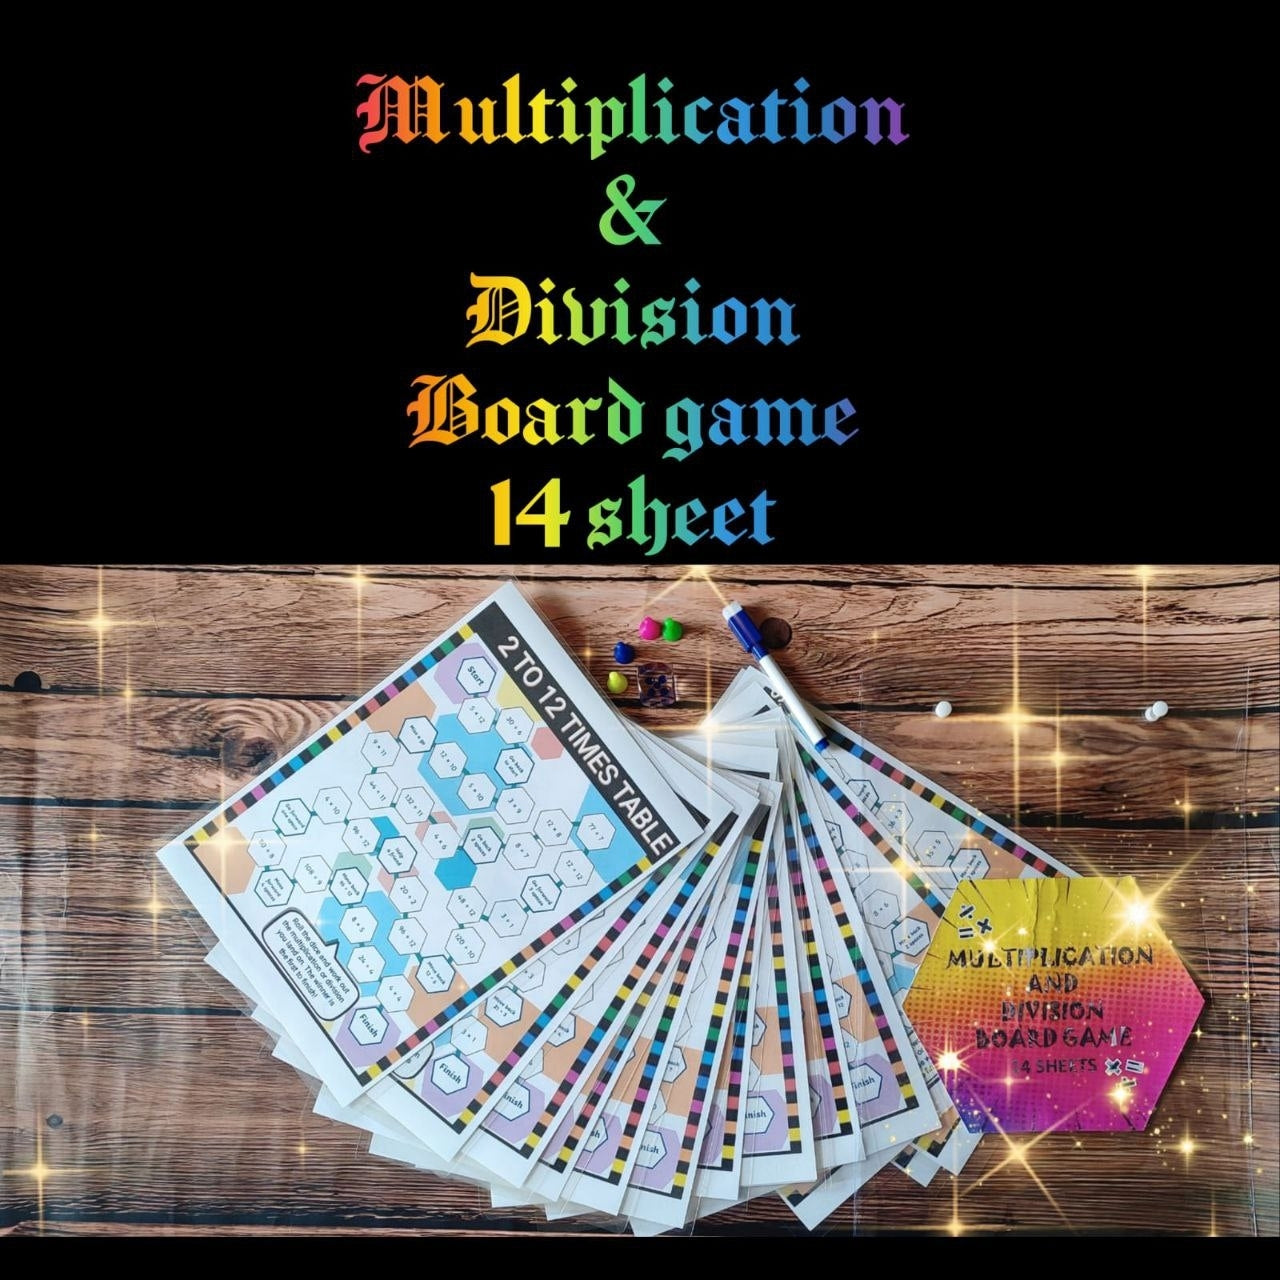 MULTIPLICATION AND DIVISION BOARD GAME | FREE SHIPPING